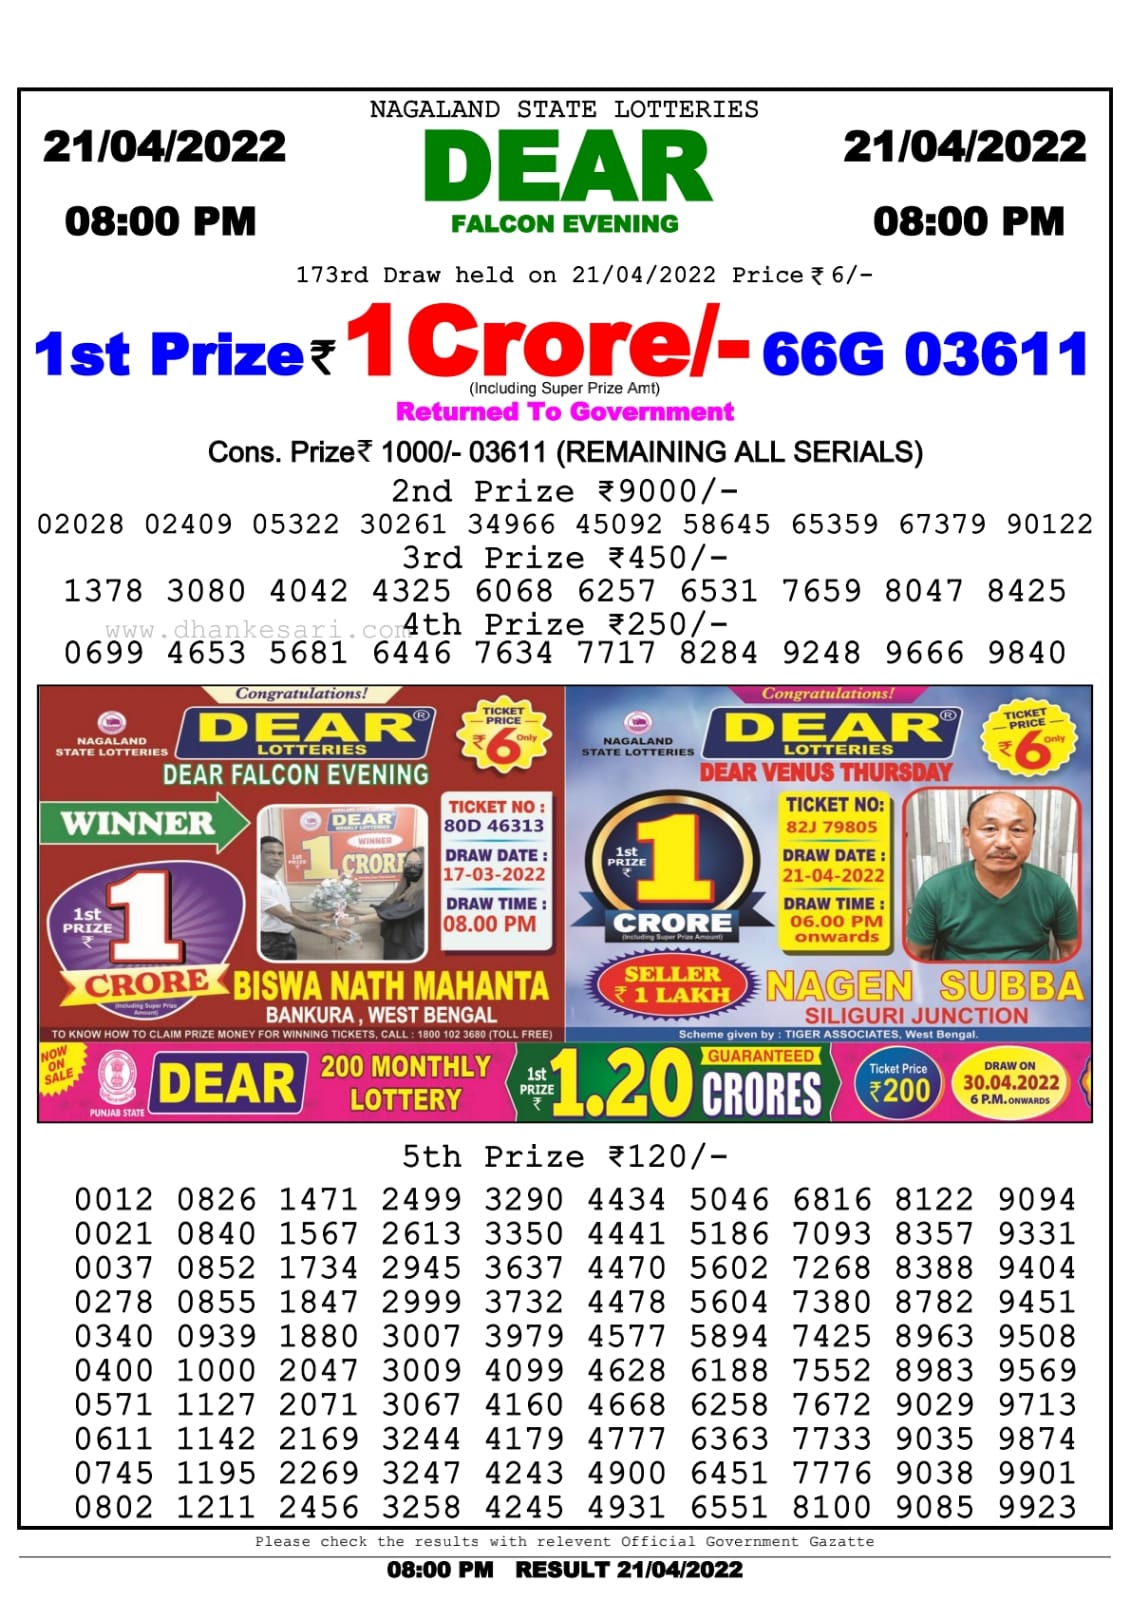 Dear Lottery Nagaland state Lottery Results 08.00 pm 21.04.2022